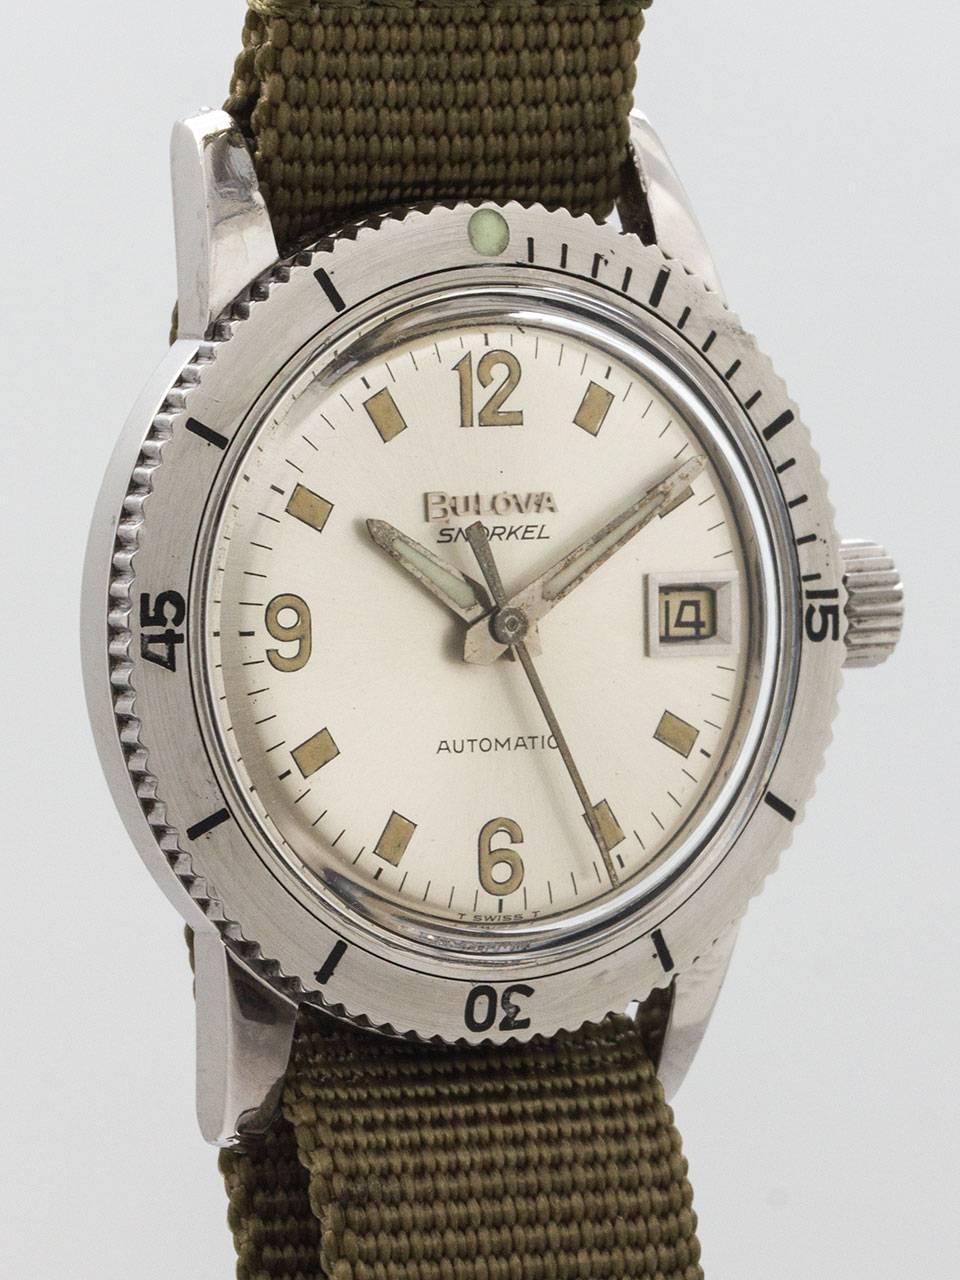 Bulova Stainless Steel Diver’s Wristwatch circa 1960s. 34mm diameter case with rotating elapsed time bezel. Original matte silvered dial with patina’d luminous indexes and hands in popular Rolex Explorer style configuration. Dial also features a